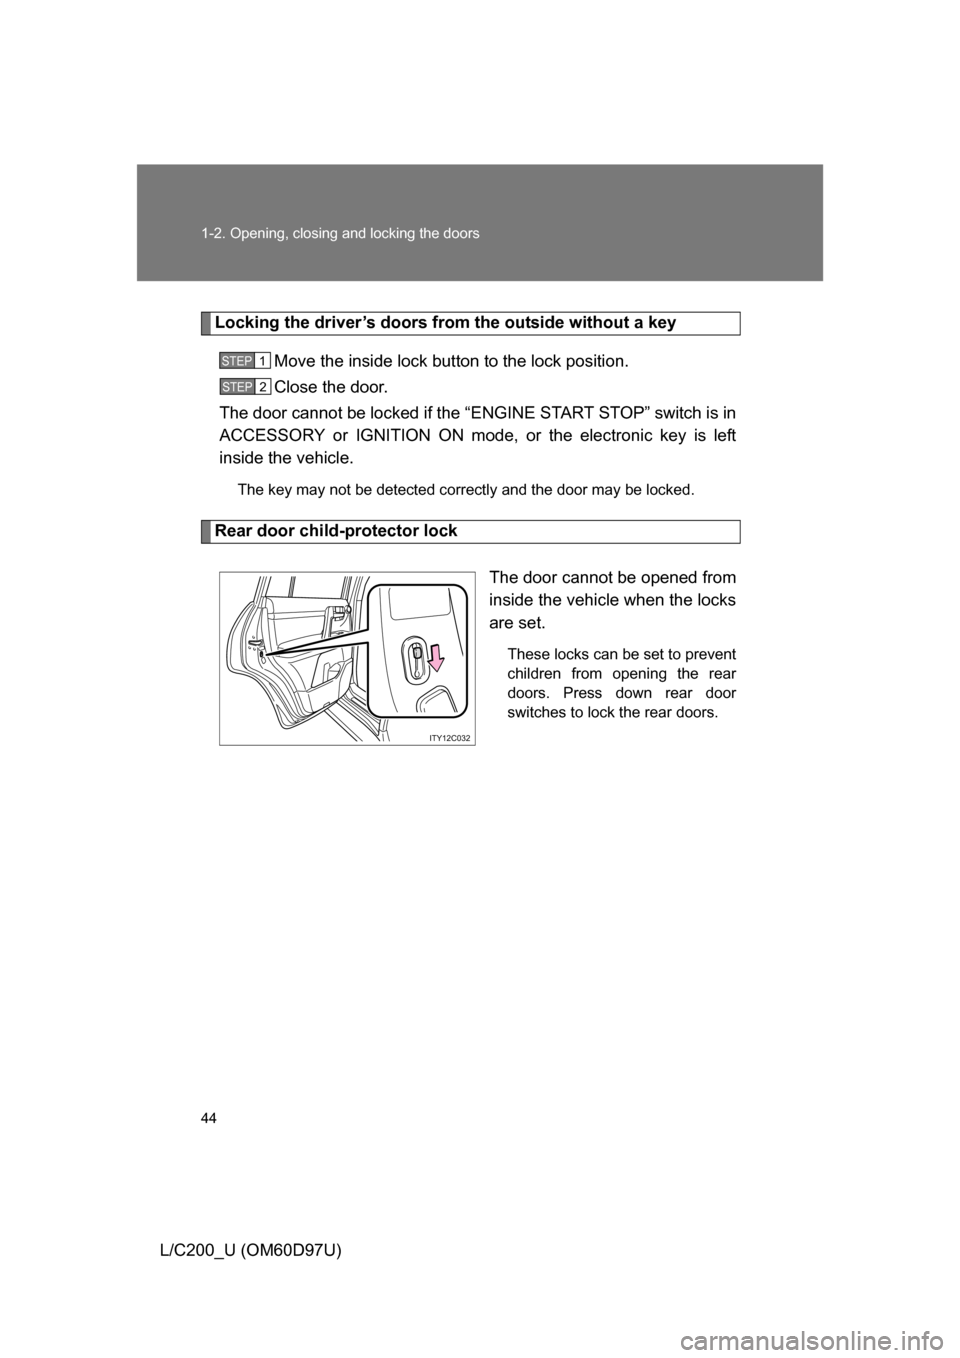 TOYOTA LAND CRUISER 2009 J200 Owners Manual 44 1-2. Opening, closing and locking the doors
L/C200_U (OM60D97U)
Locking the driver’s doors from the outside without a keyMove the inside lock button to the lock position.
Close the door.
The door